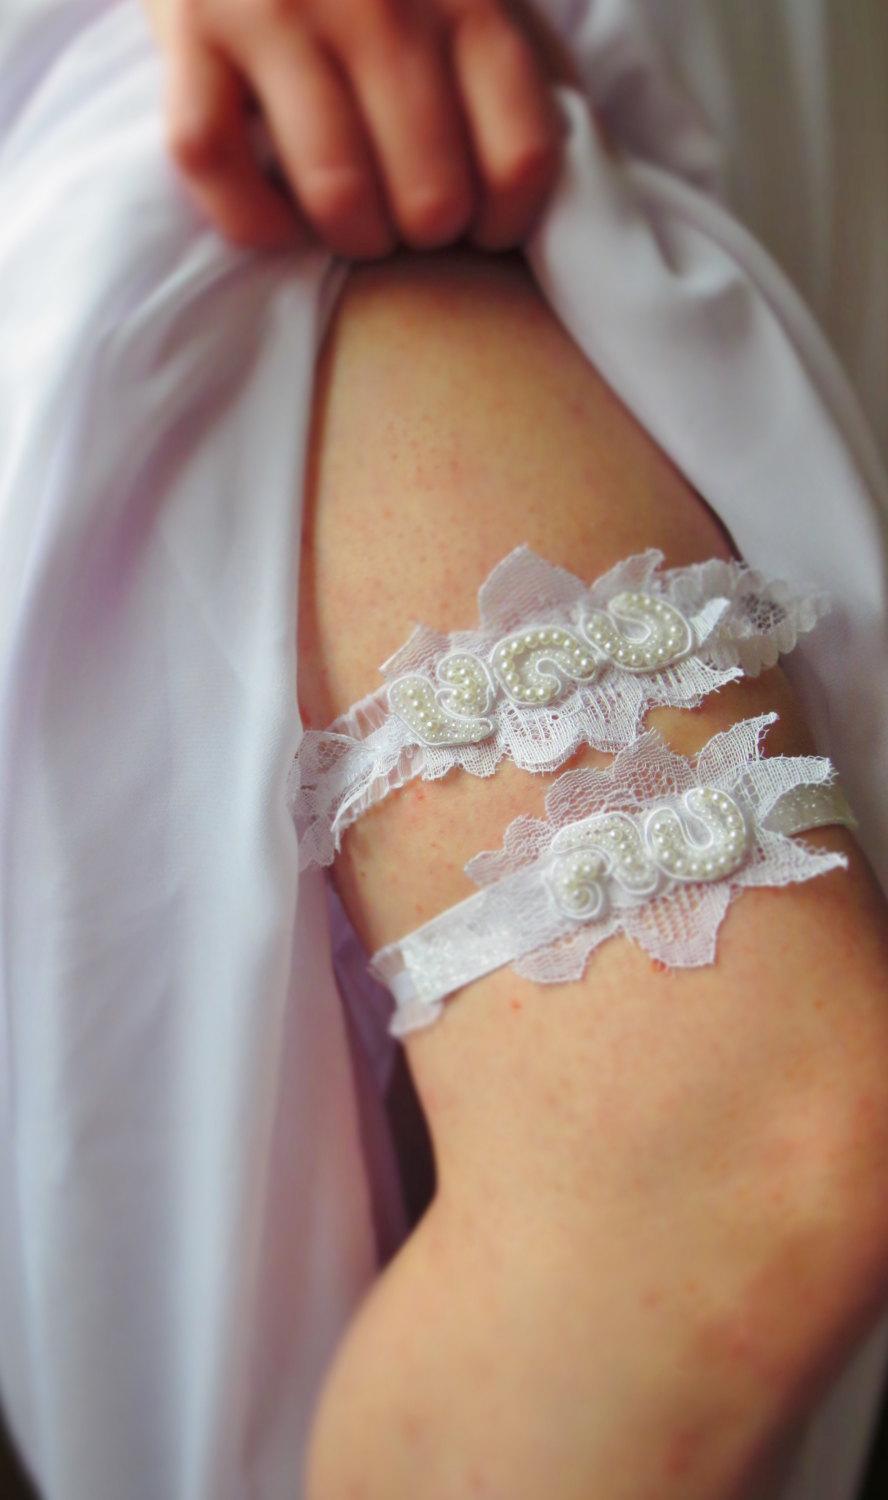 Wedding - Simple White Pearl, Lace and Ruffle Wedding Garter set- Keepsake and Toss away White ruffle garters w/ floral lace applique and pearl accent